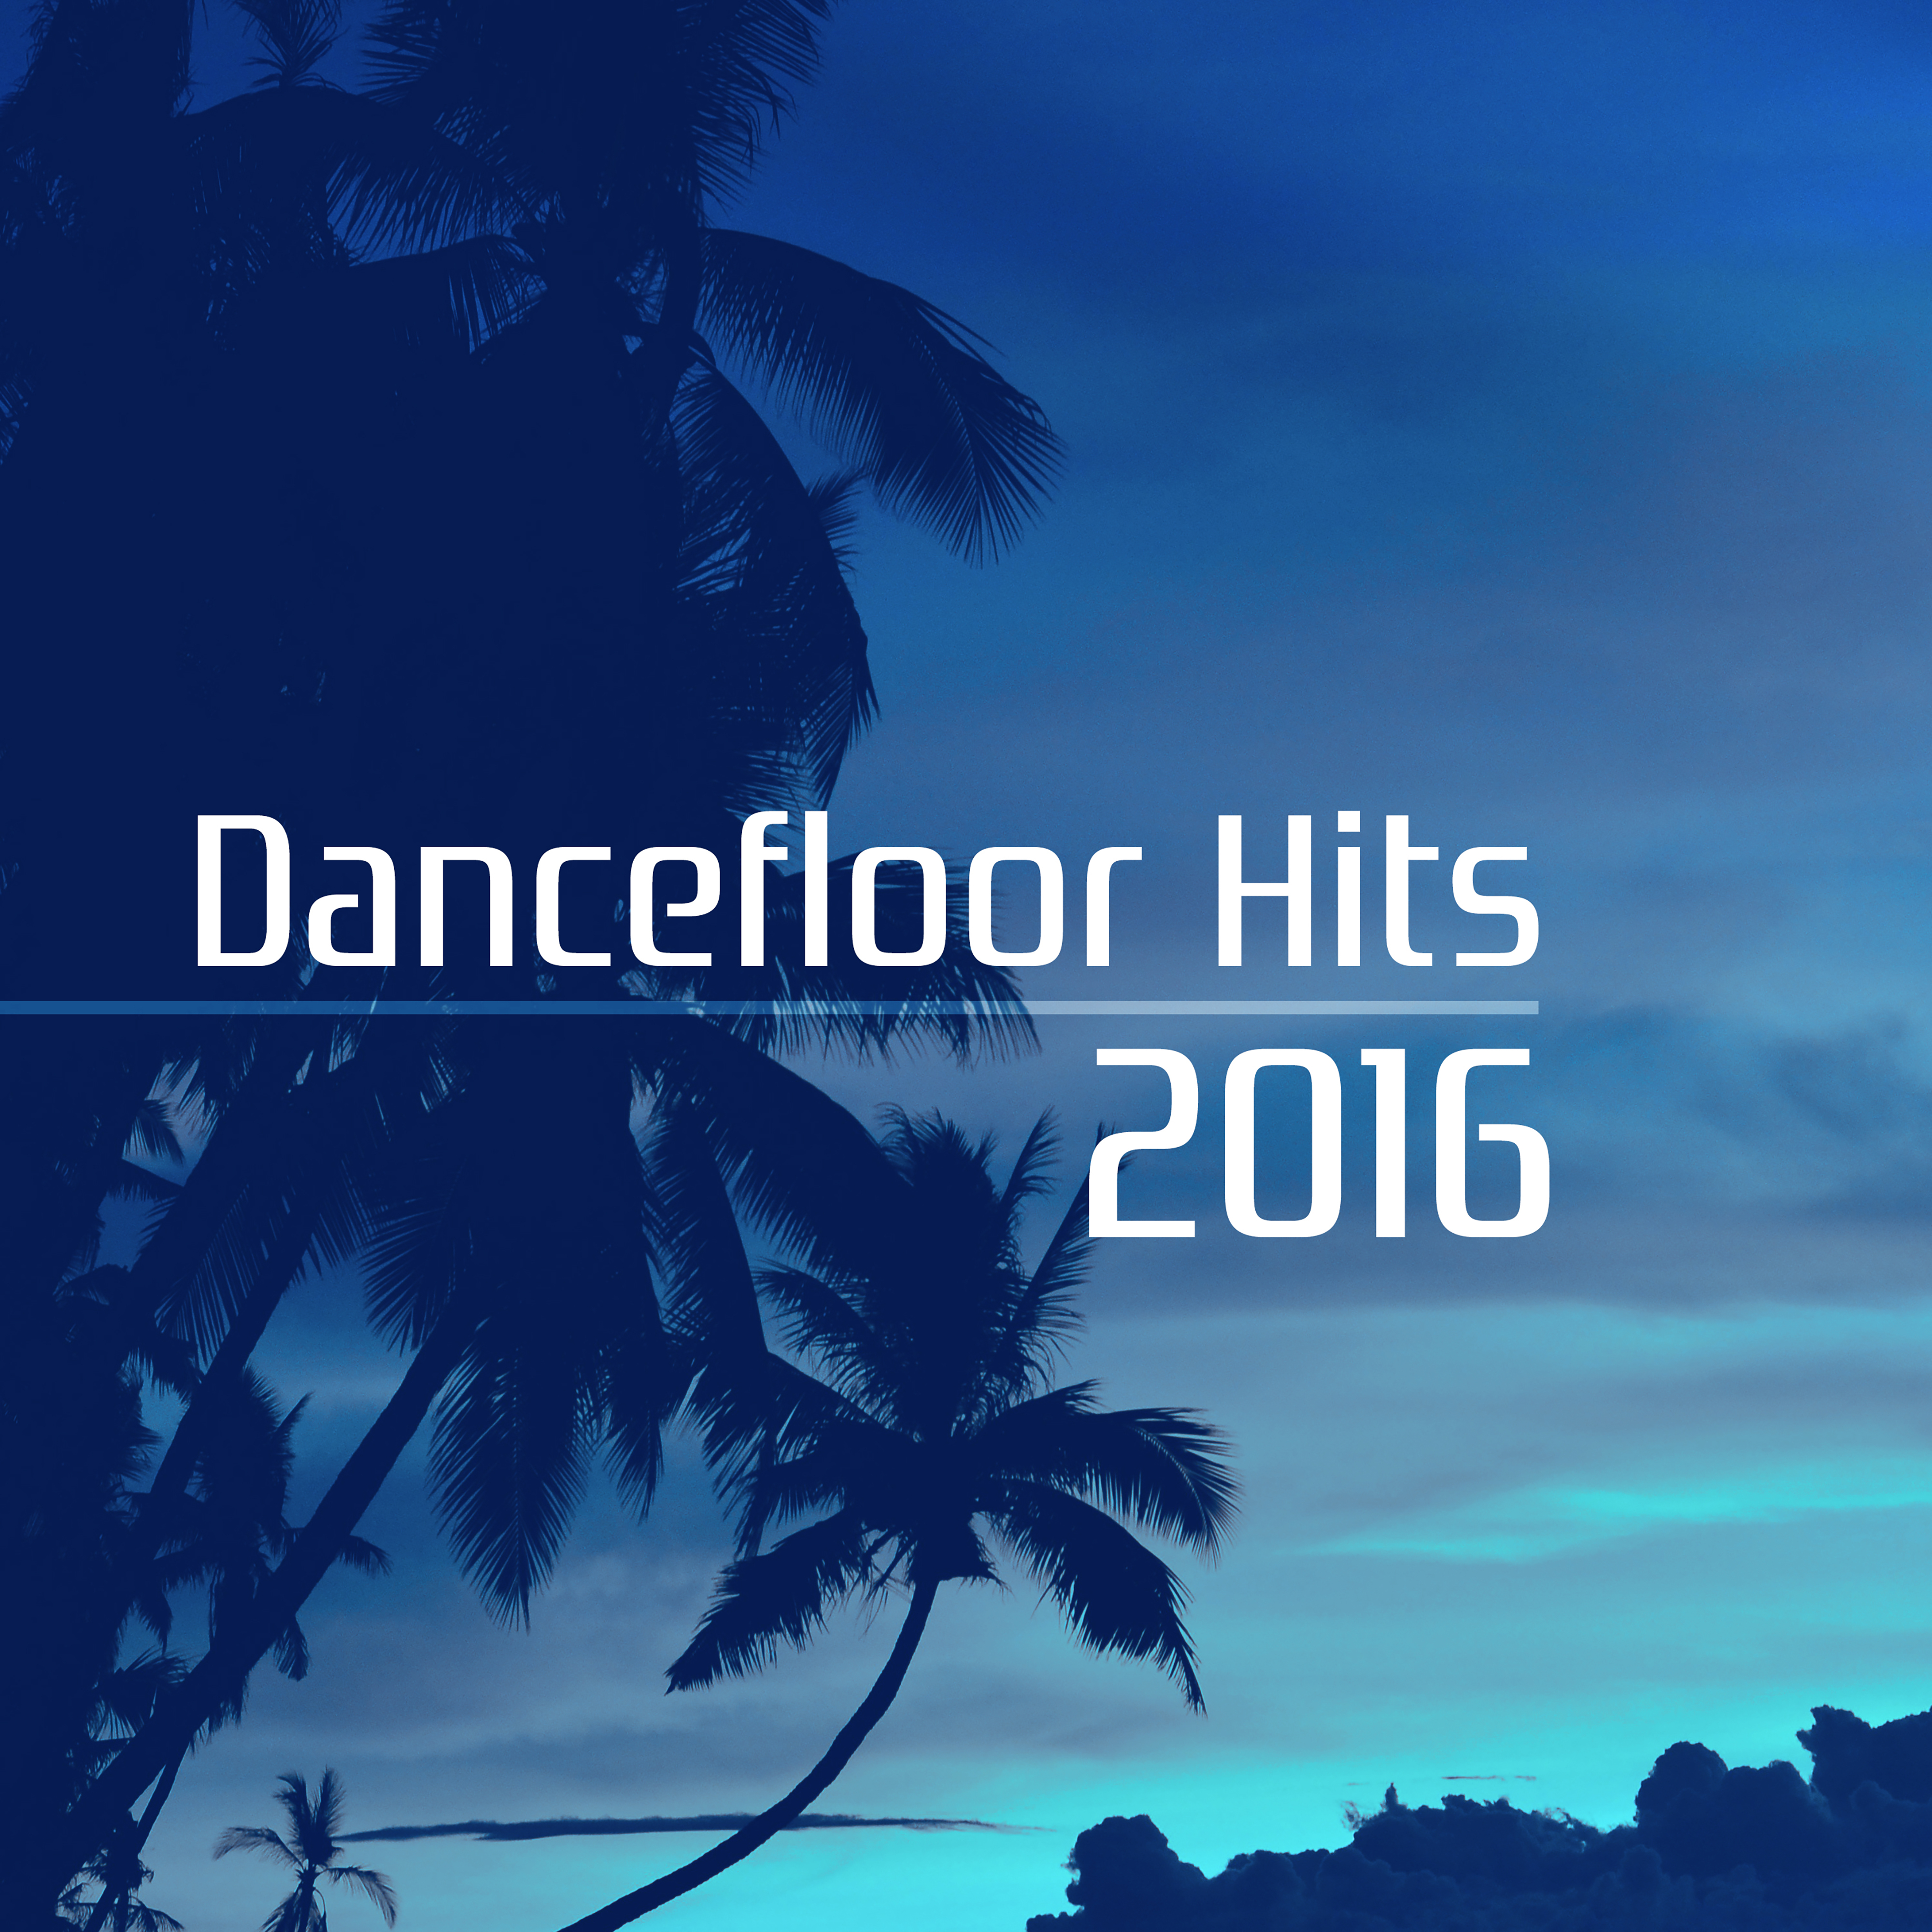 Dancefloor Hits 2016 – The Best Tracks of Chill Out 2016, Chill Out Lounge, Electro Music